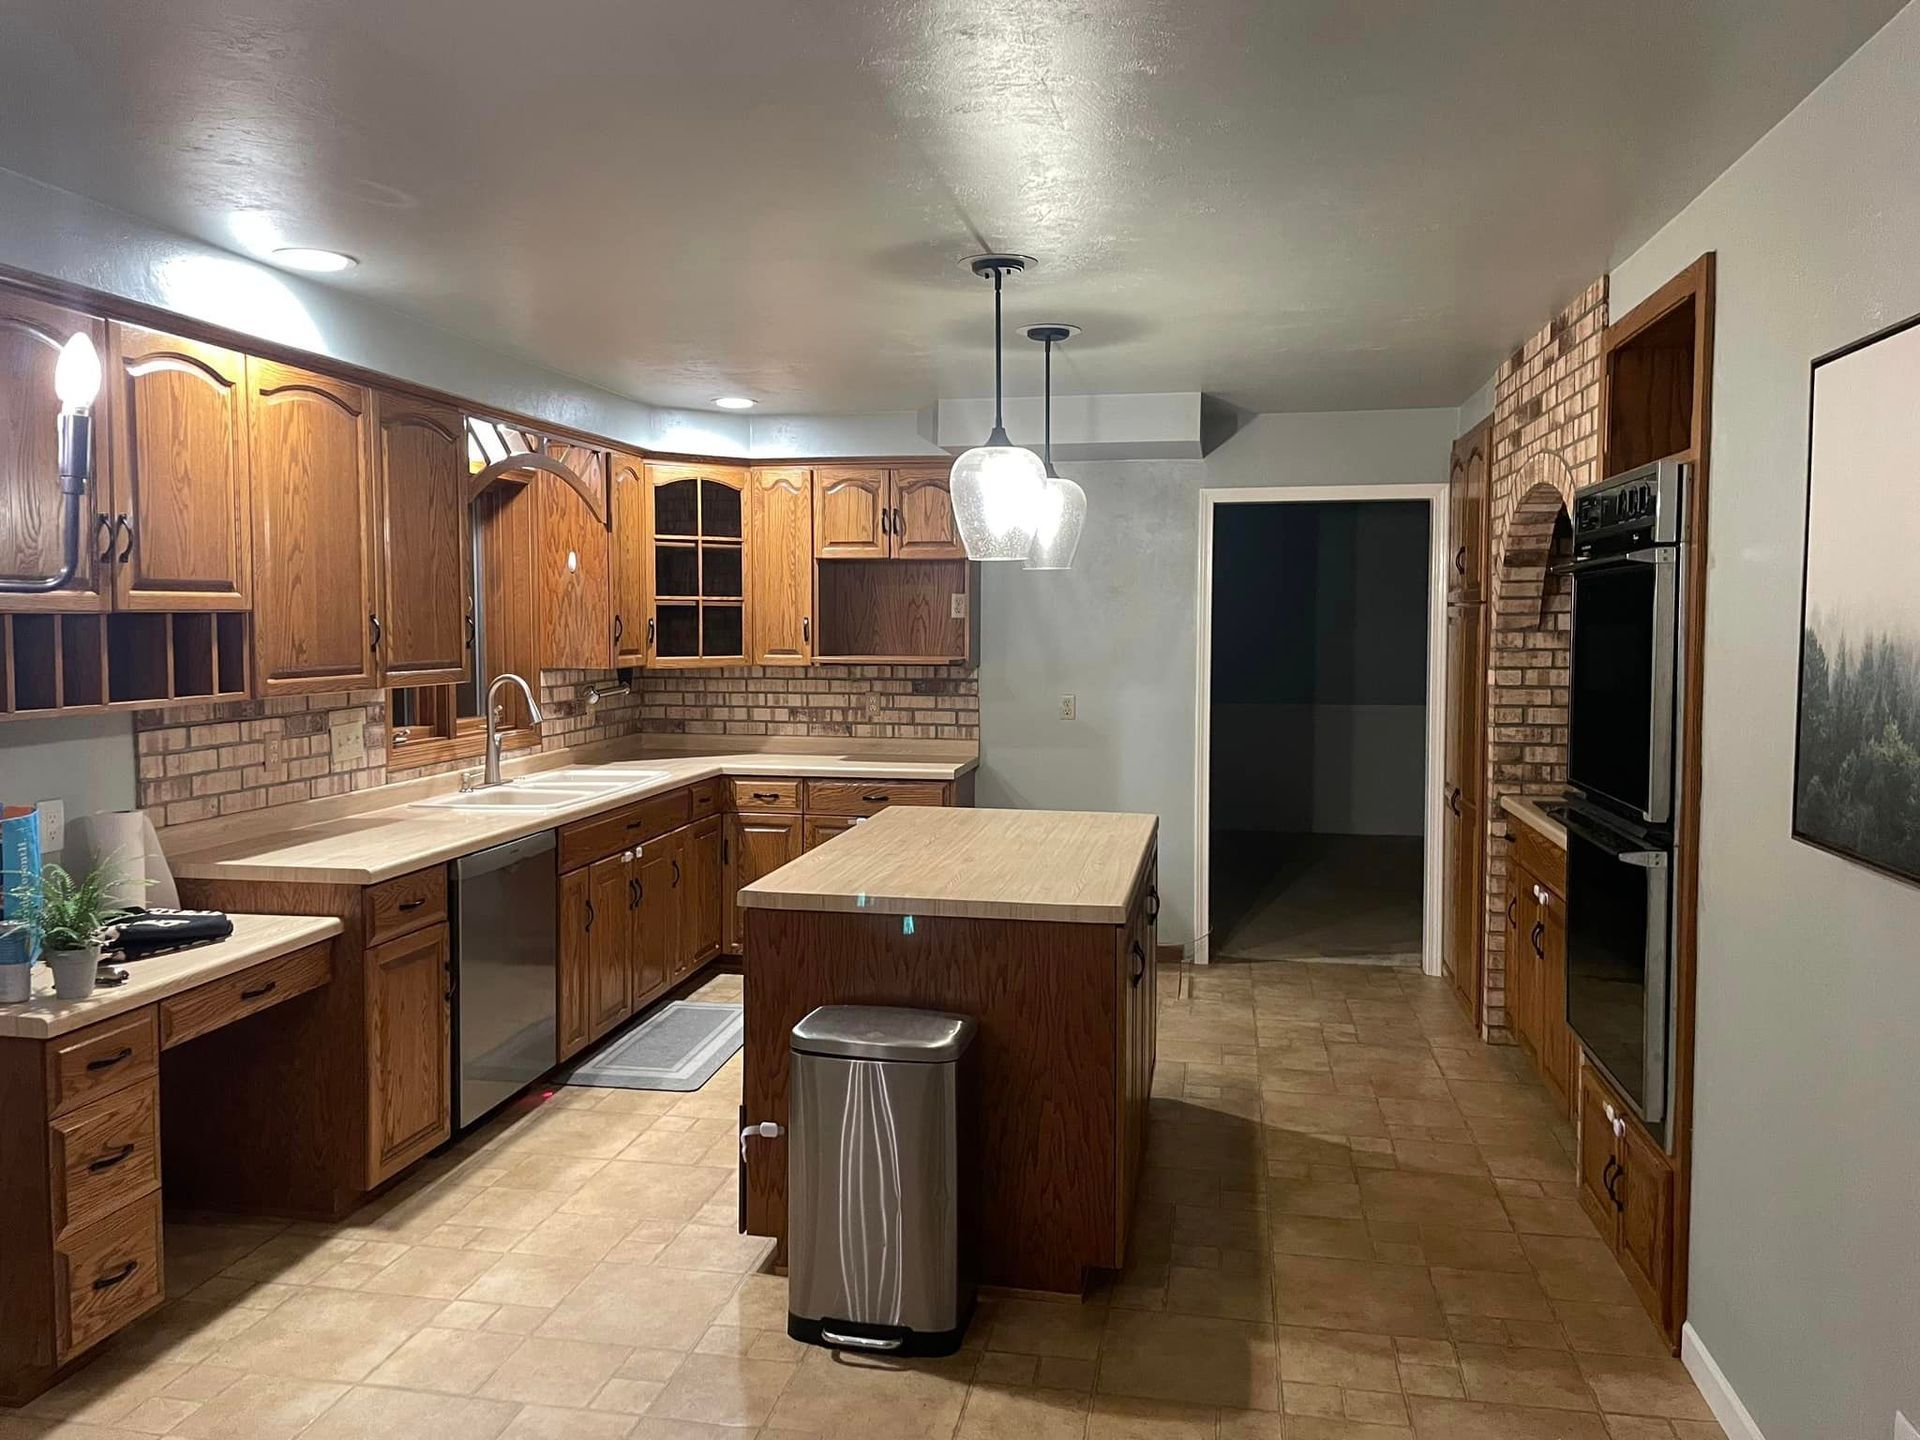 A kitchen with wooden cabinets , stainless steel appliances , a large island and a trash can.